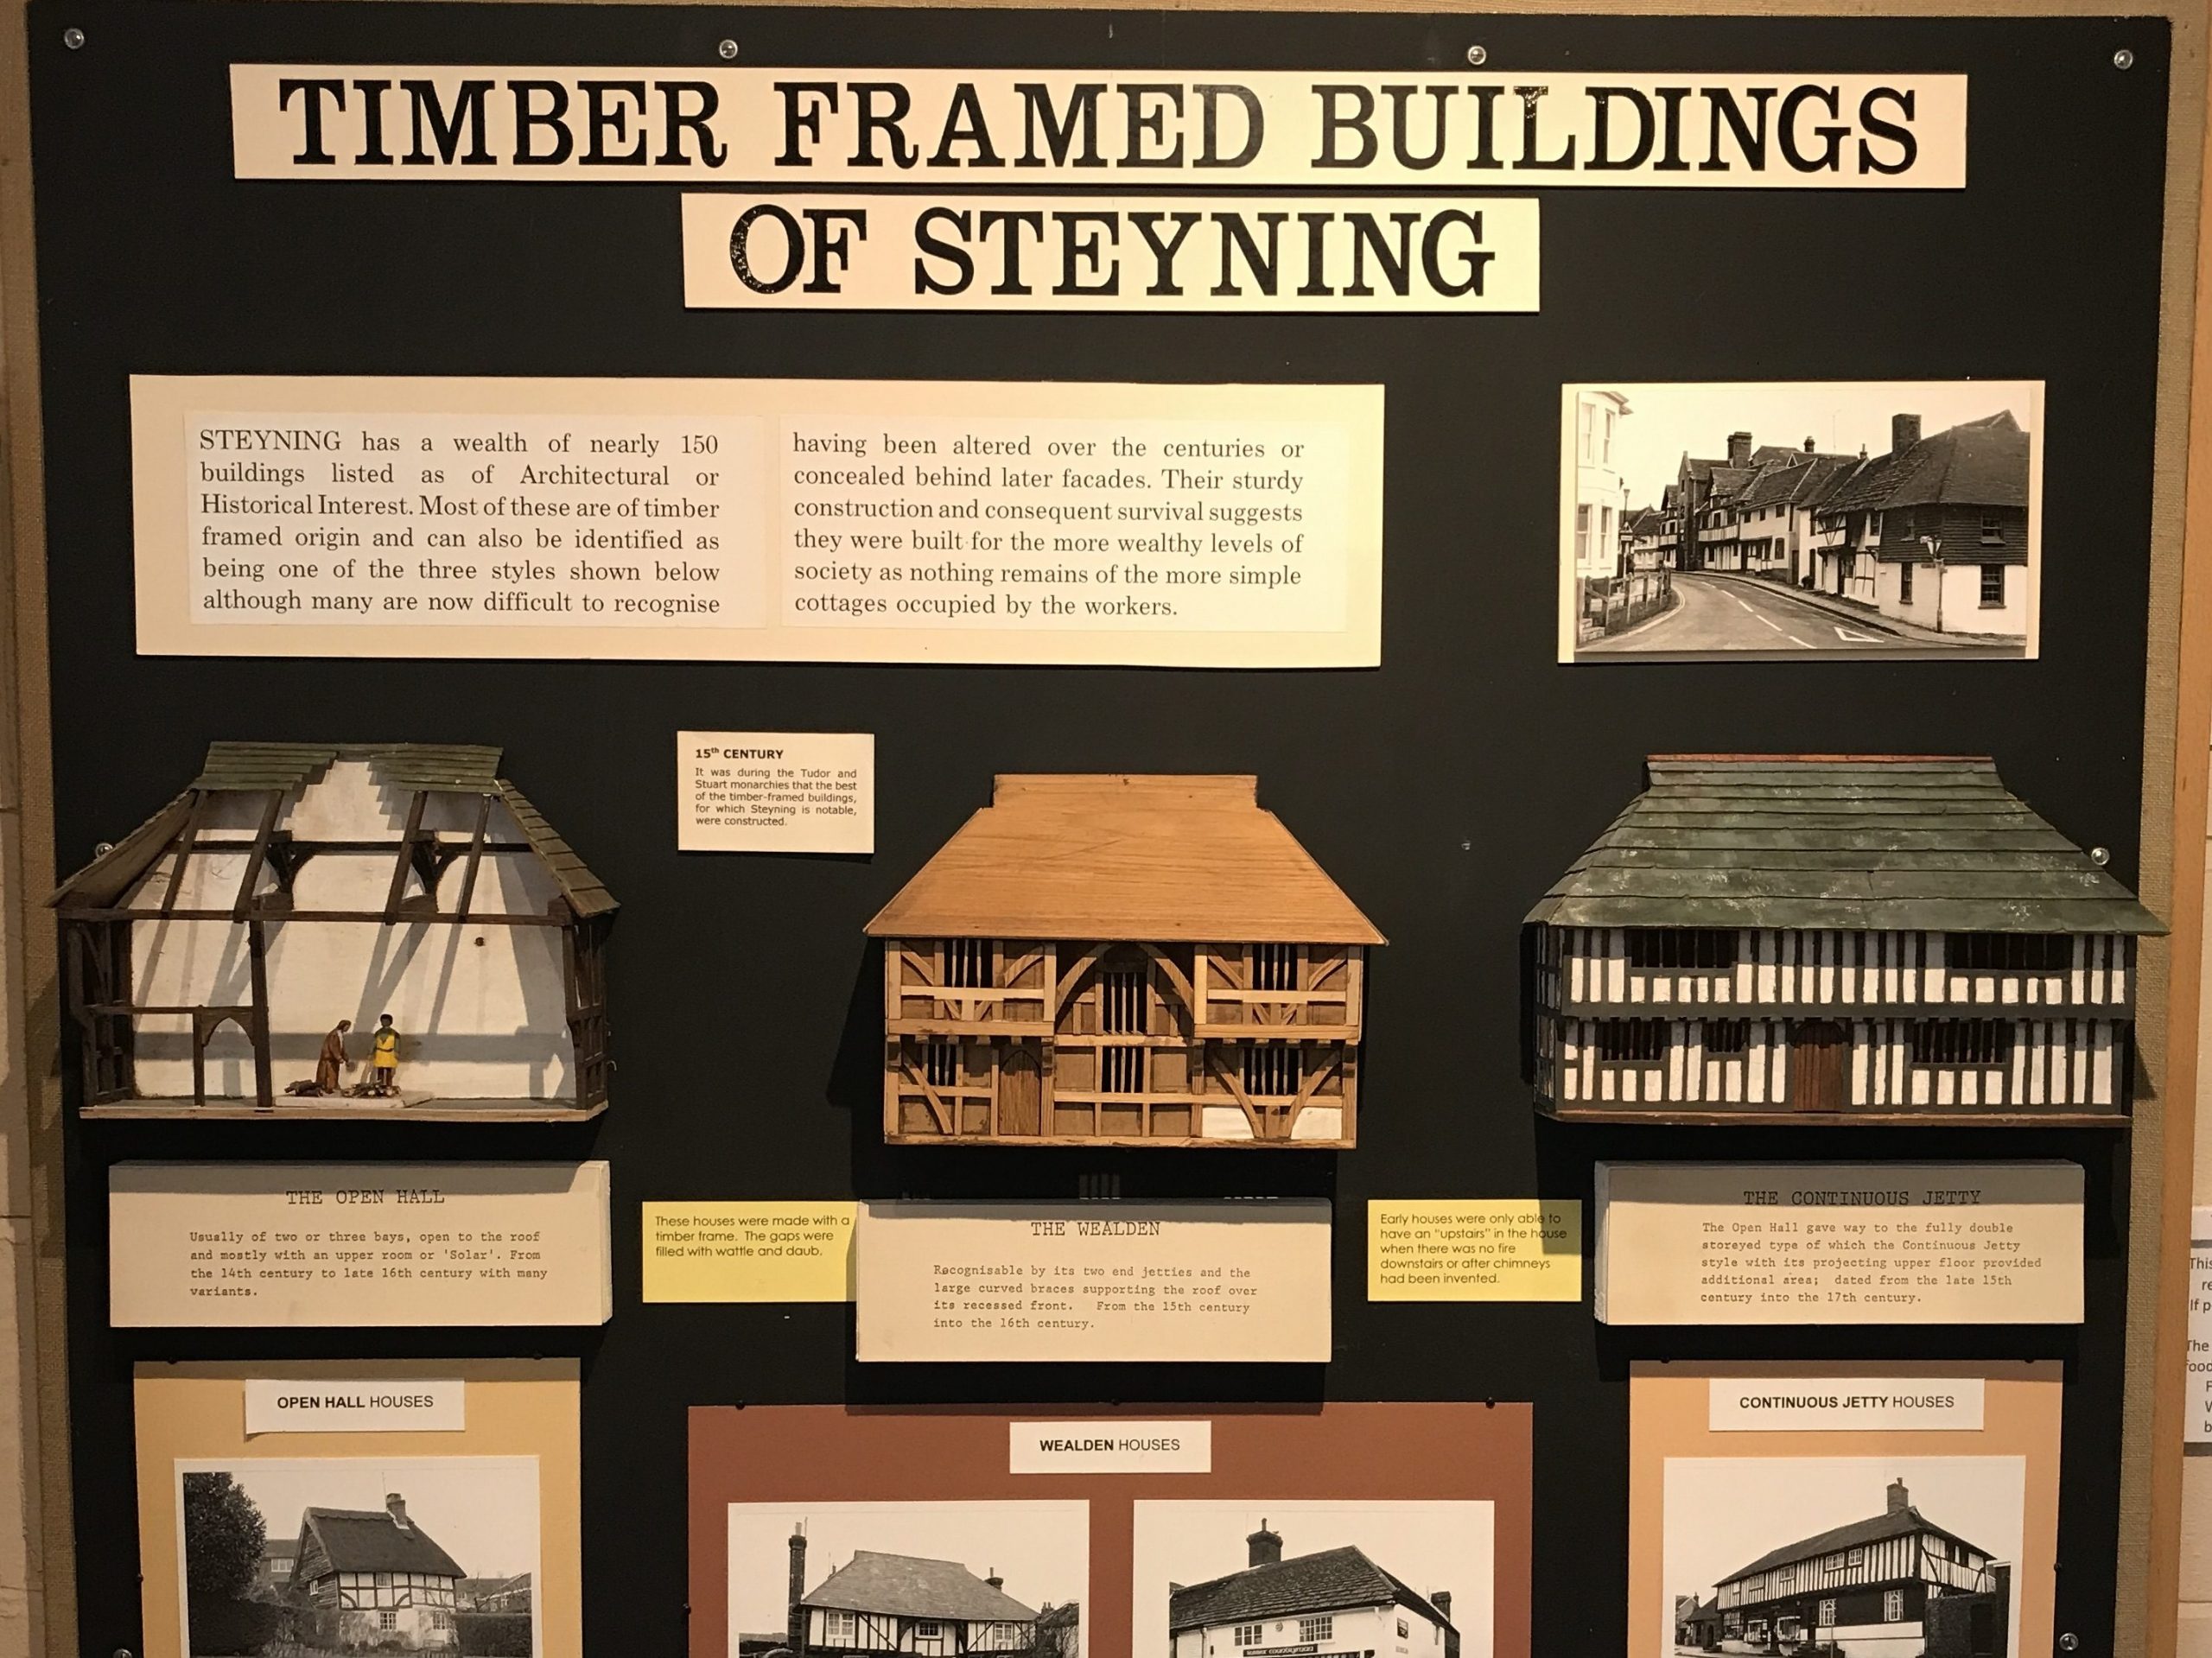 Timber framed buildings of Steyning